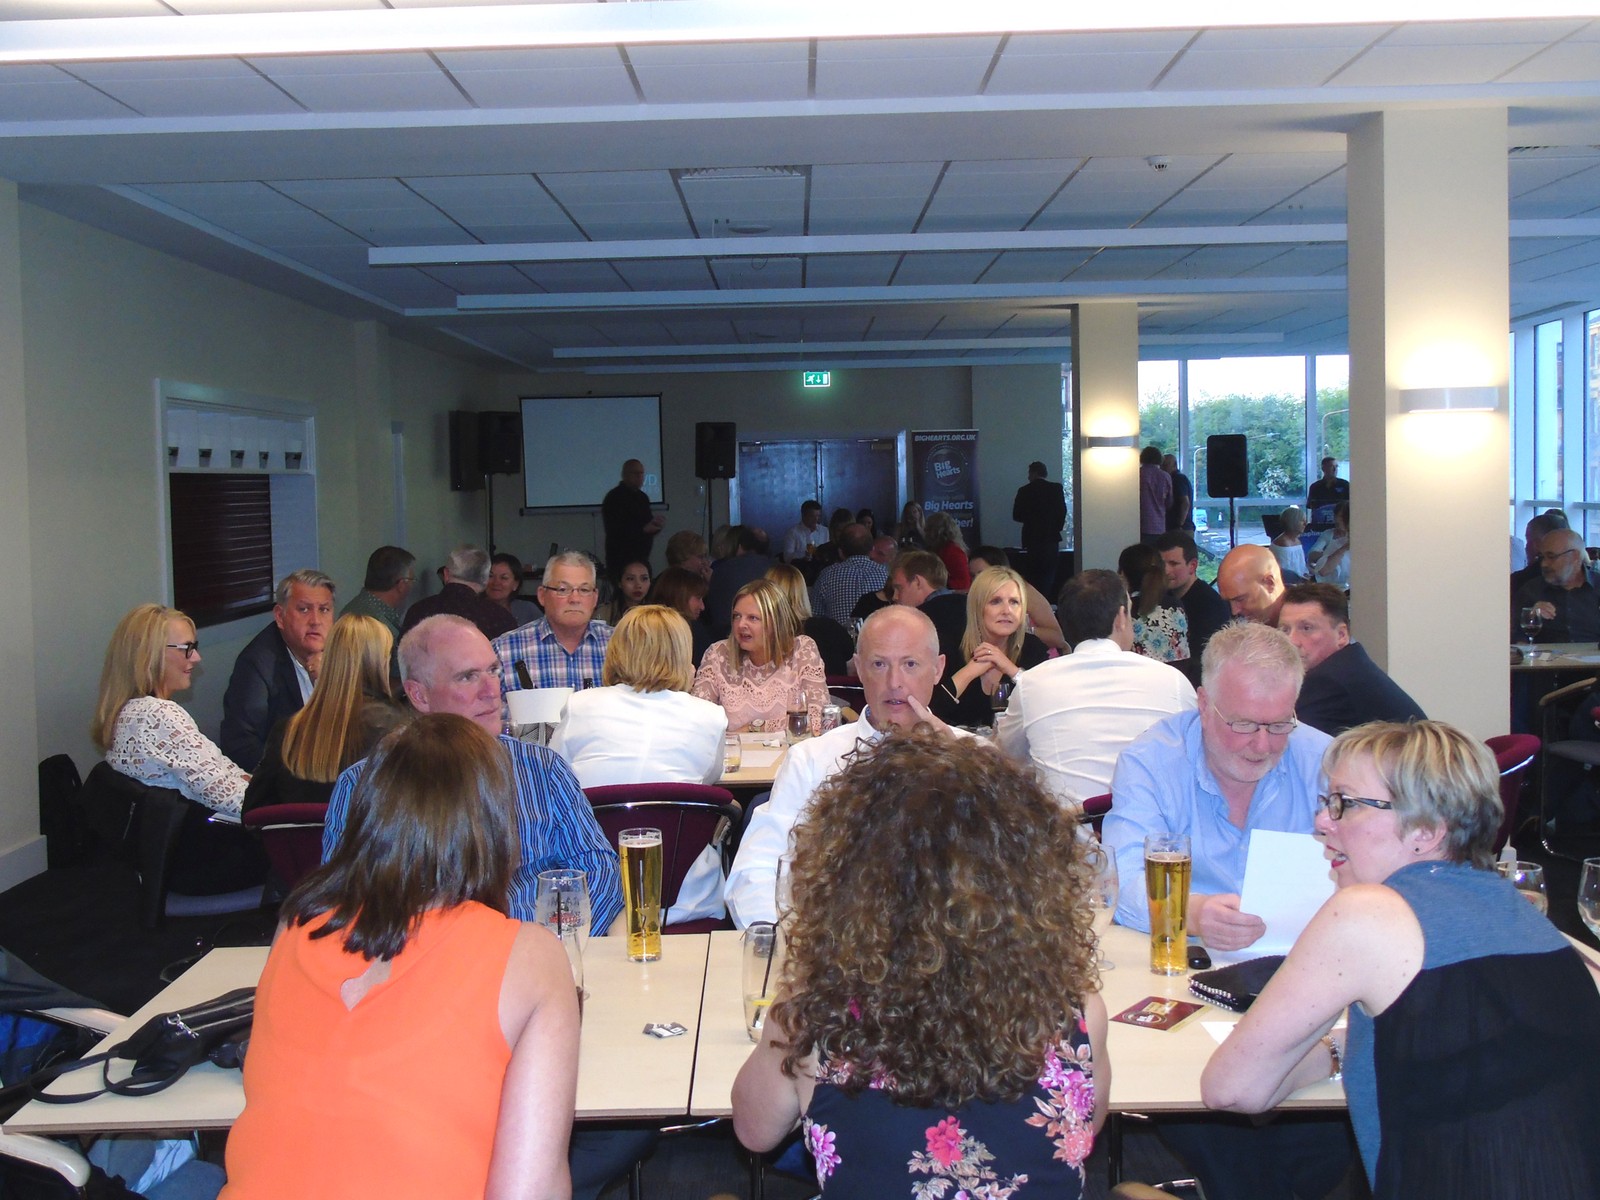  » Over £2,700 raised by our Supporters at Tynecastle Race Night!